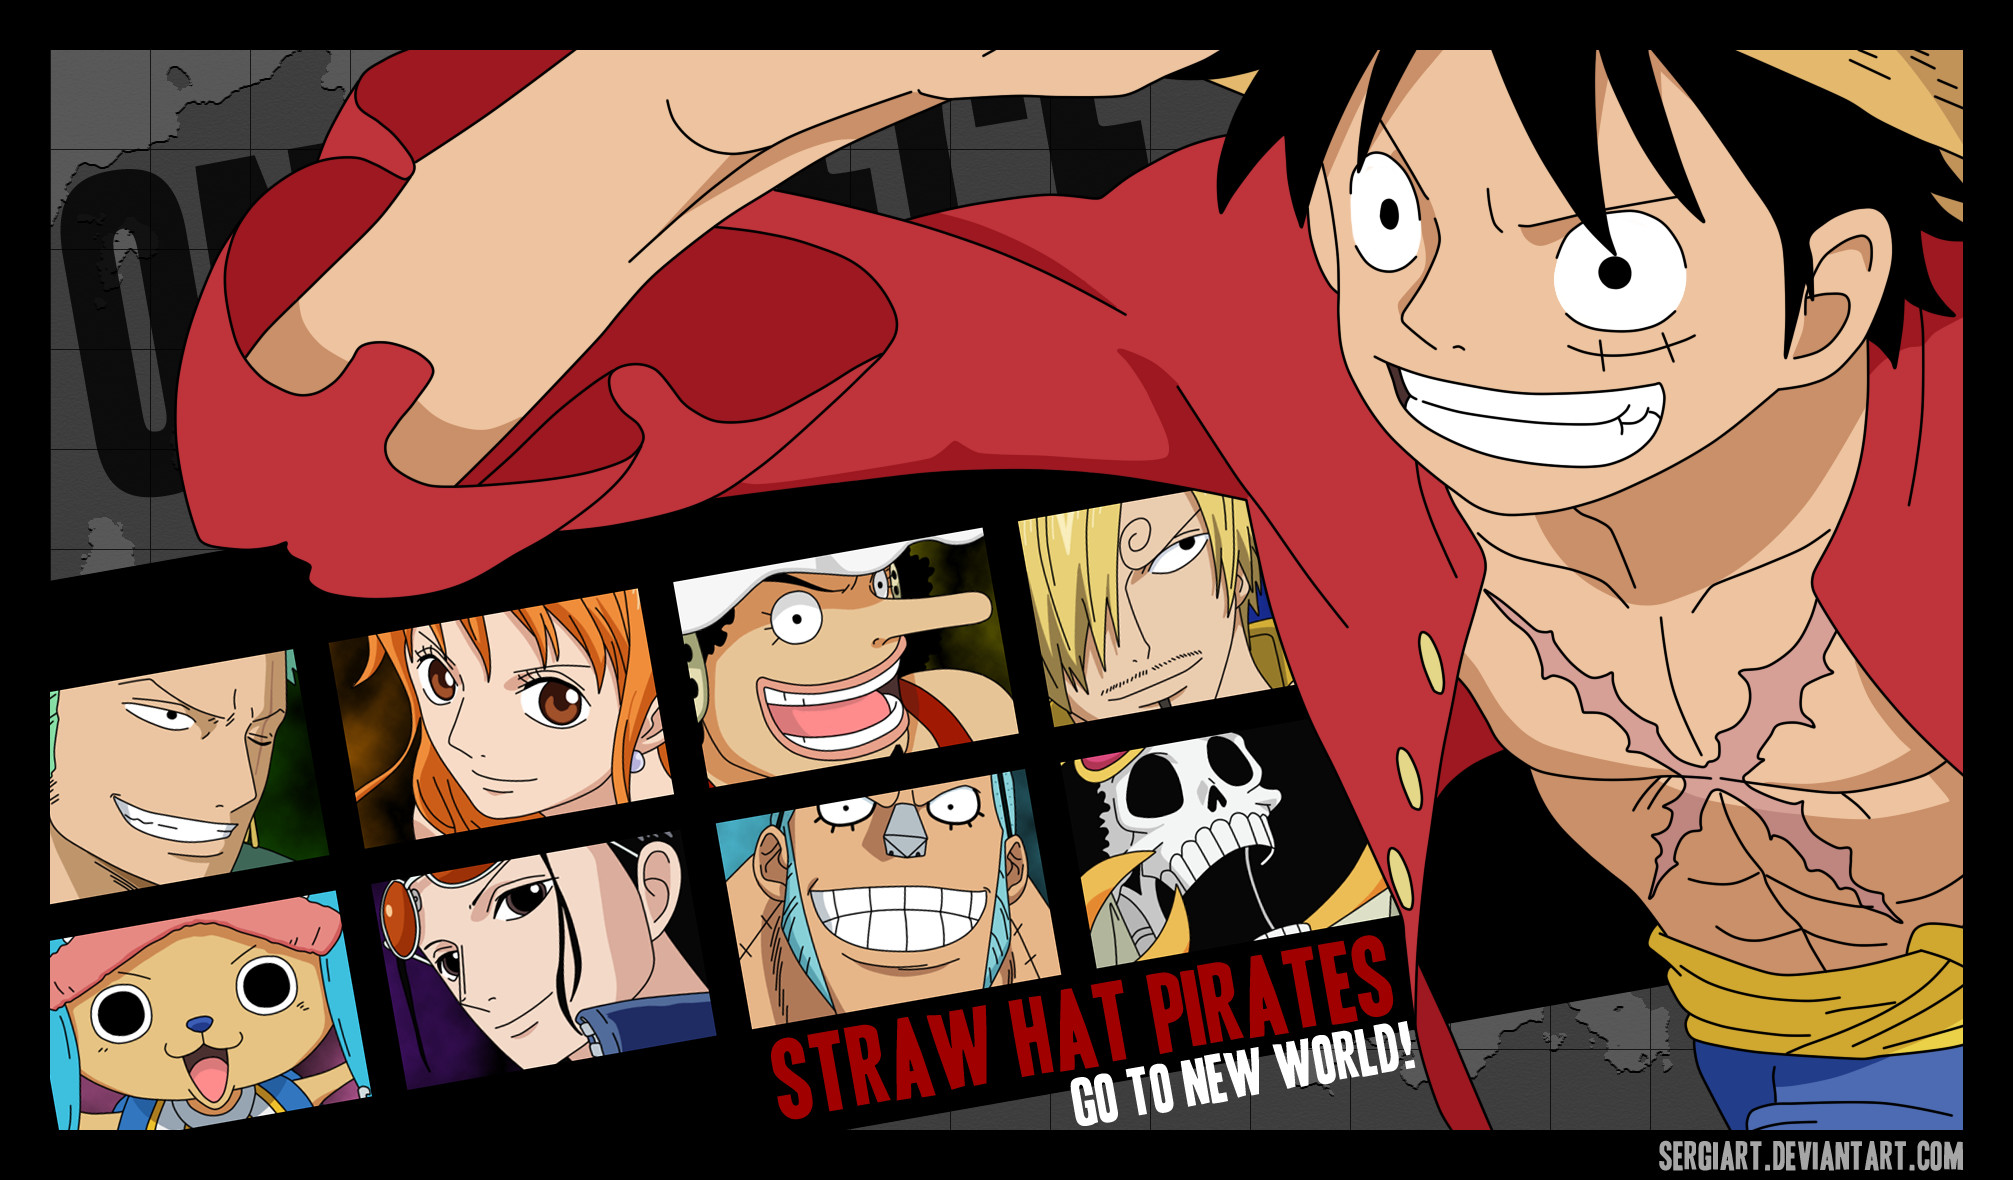 2013x1180 ... Straw Hat Pirates - Go to the New World by SergiART